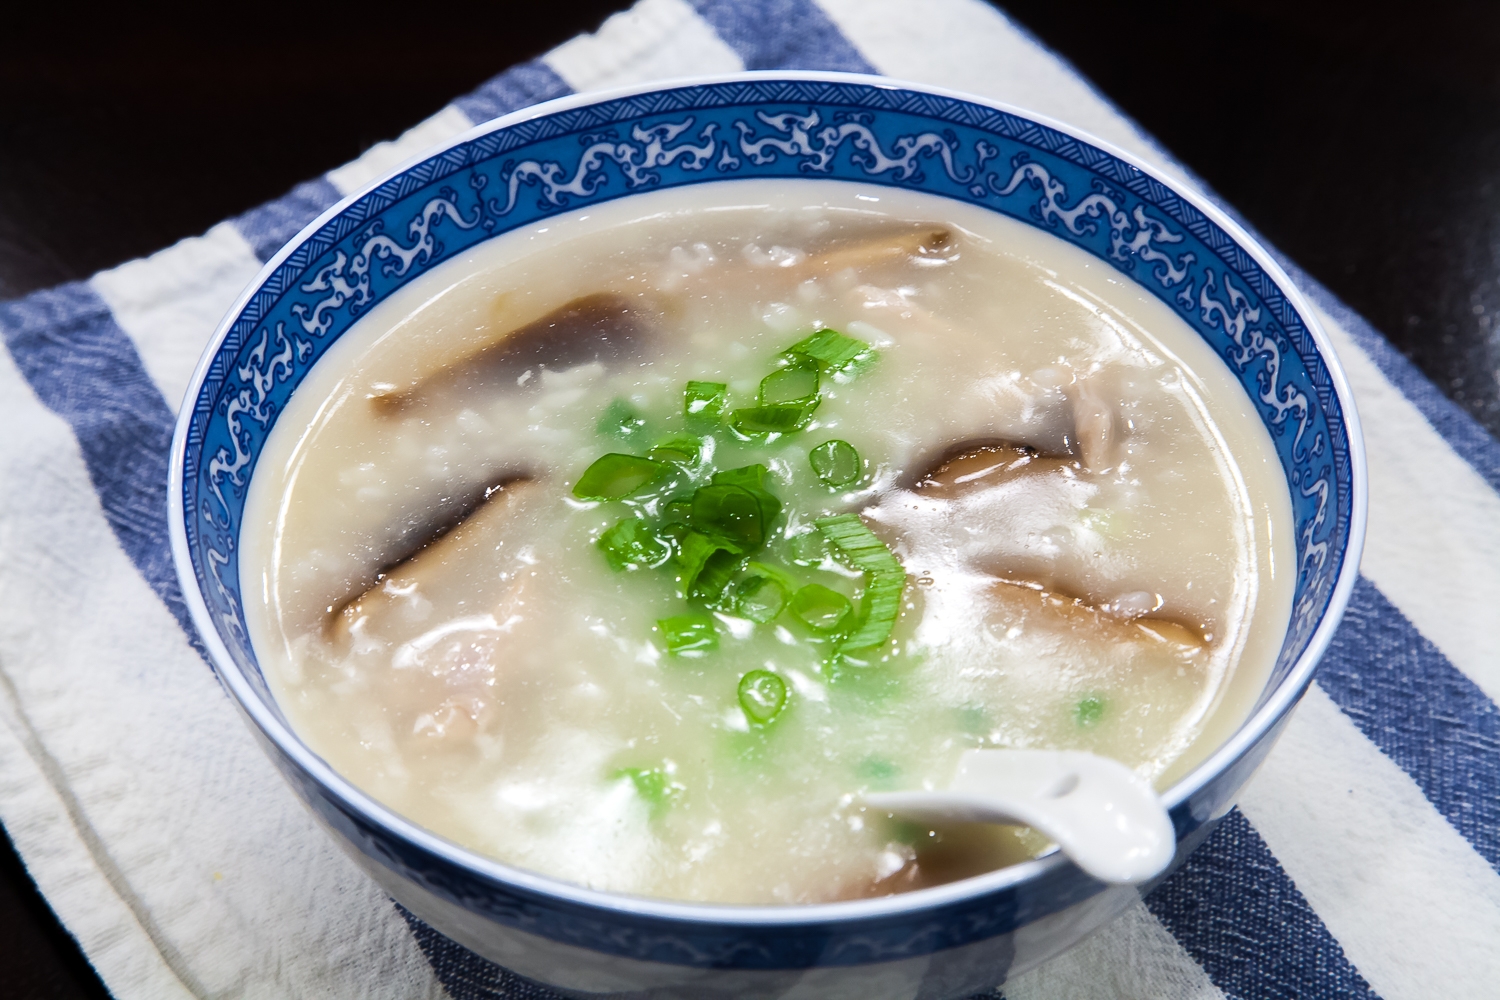 Fish Fillet Congee Using Instant Pot (电压锅版生滚鱼片粥) | Asian Cooking Mom